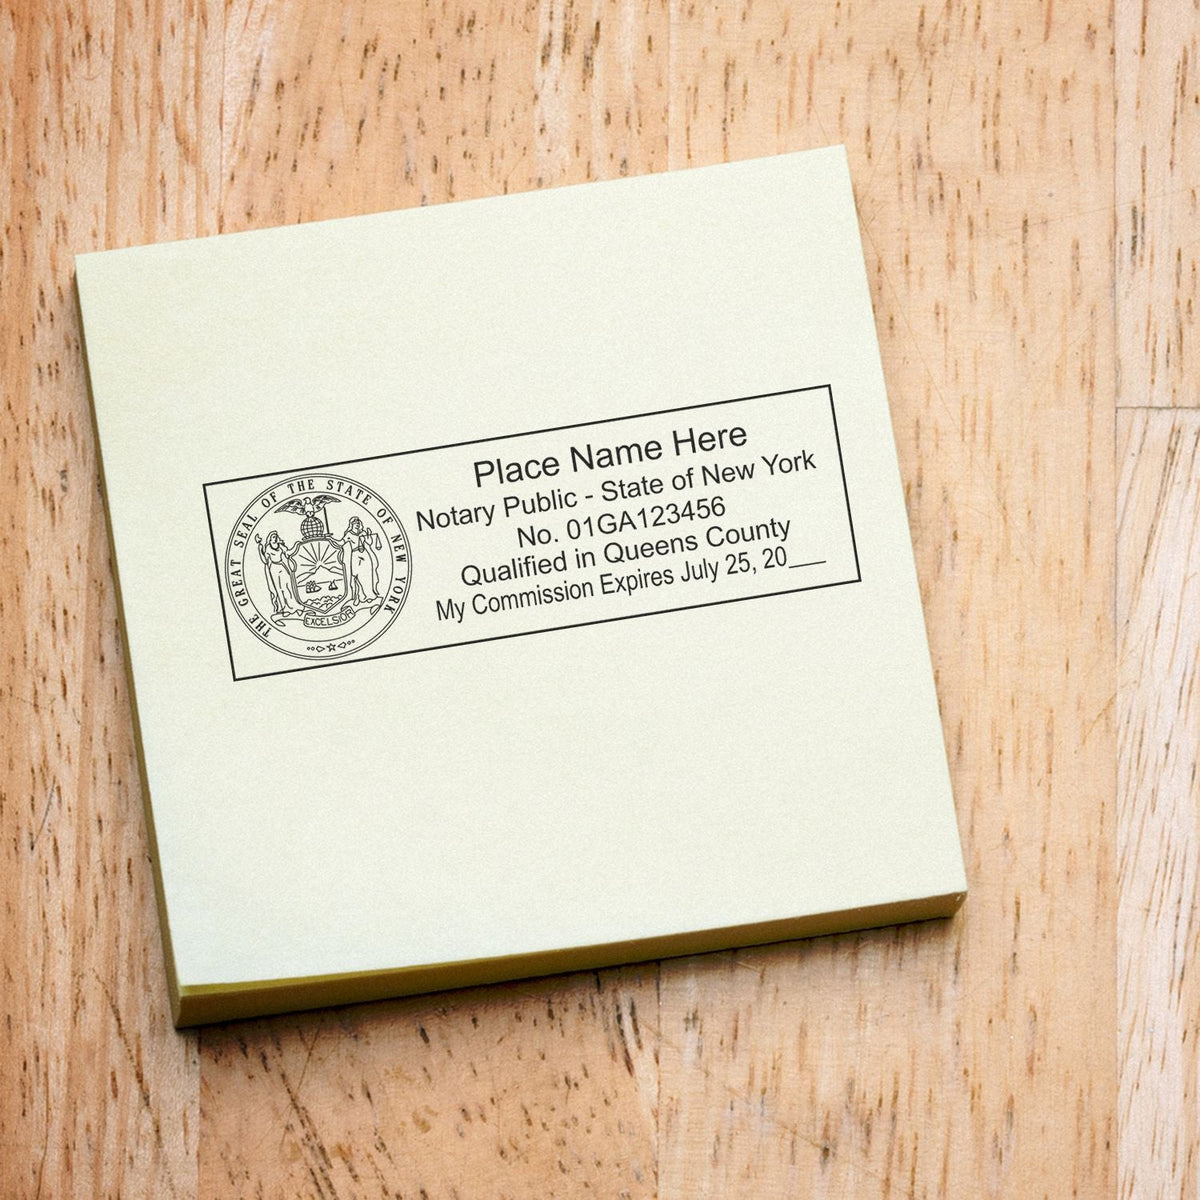 State Seal Notary Stamp In Use 3